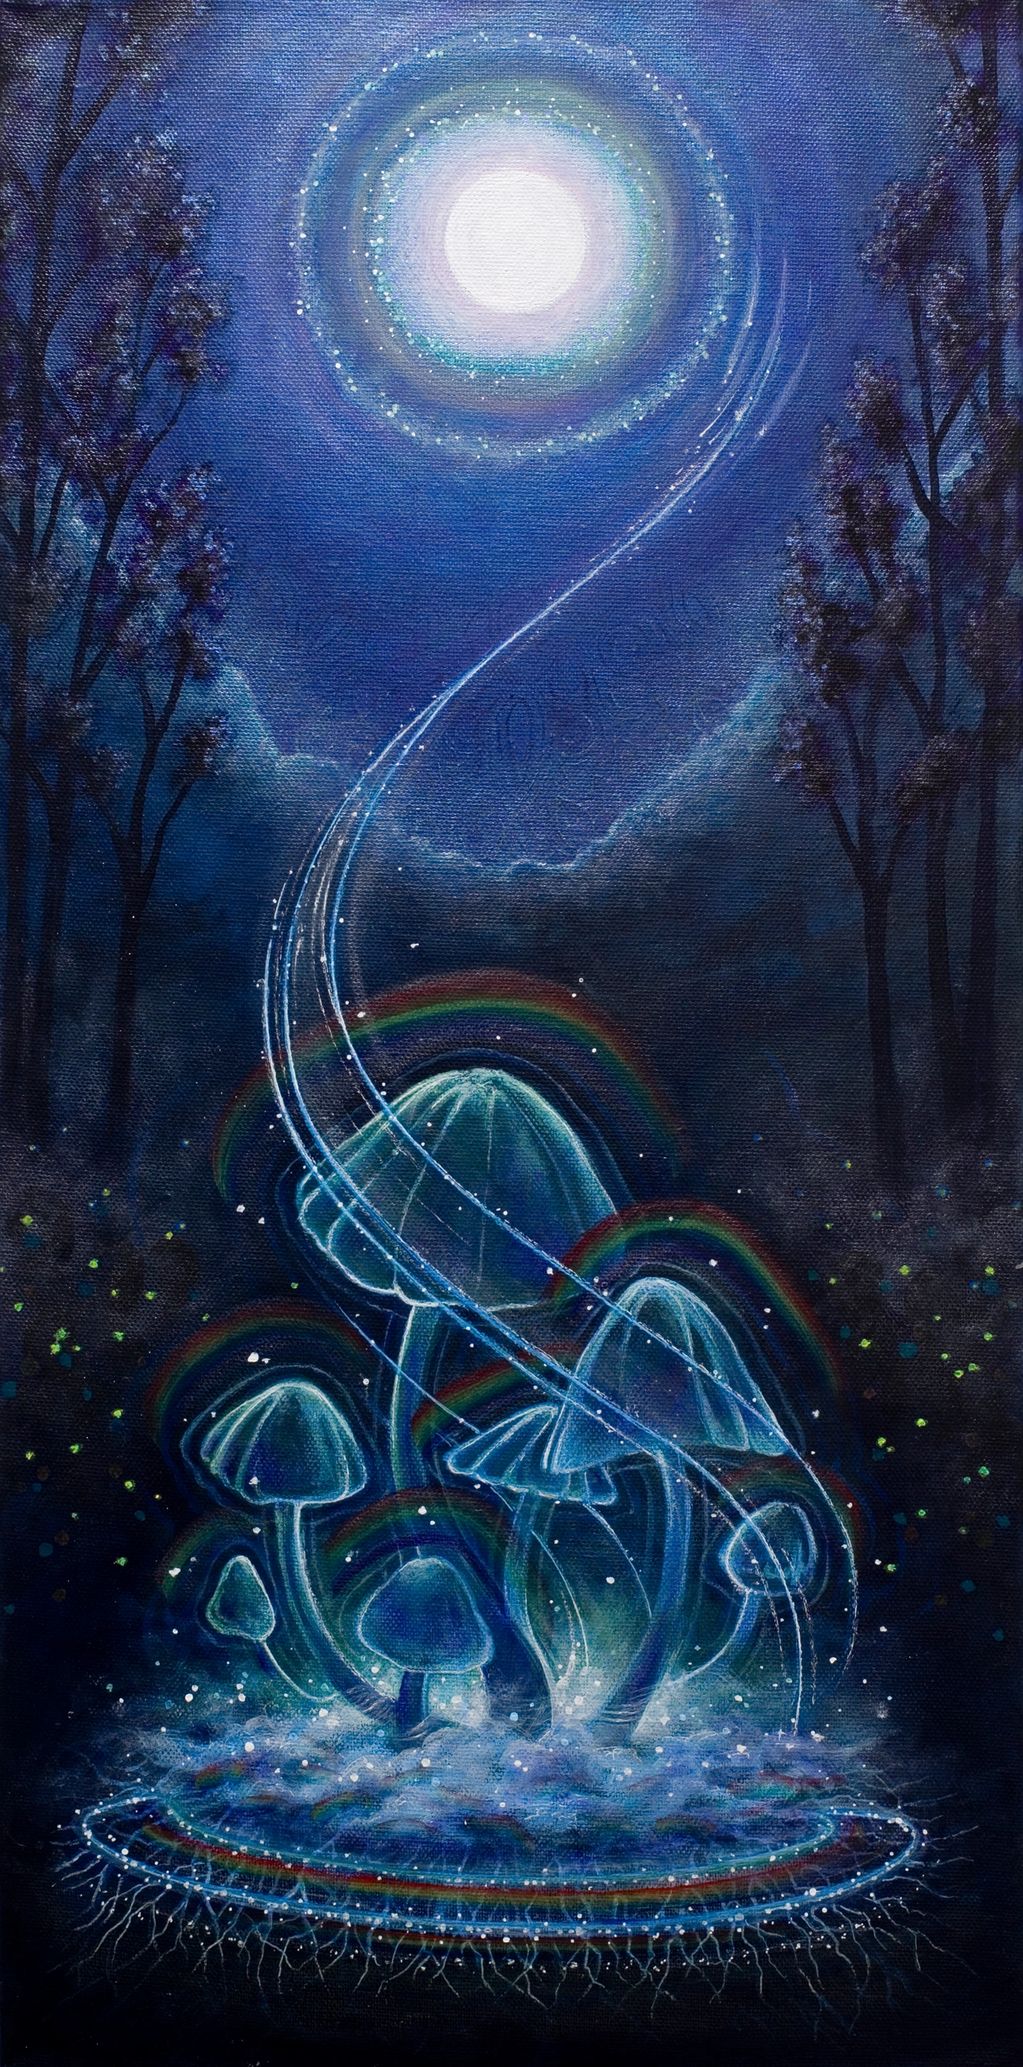 blue mushrooms under moonlight with rainbows and fireflies and electric mycelium